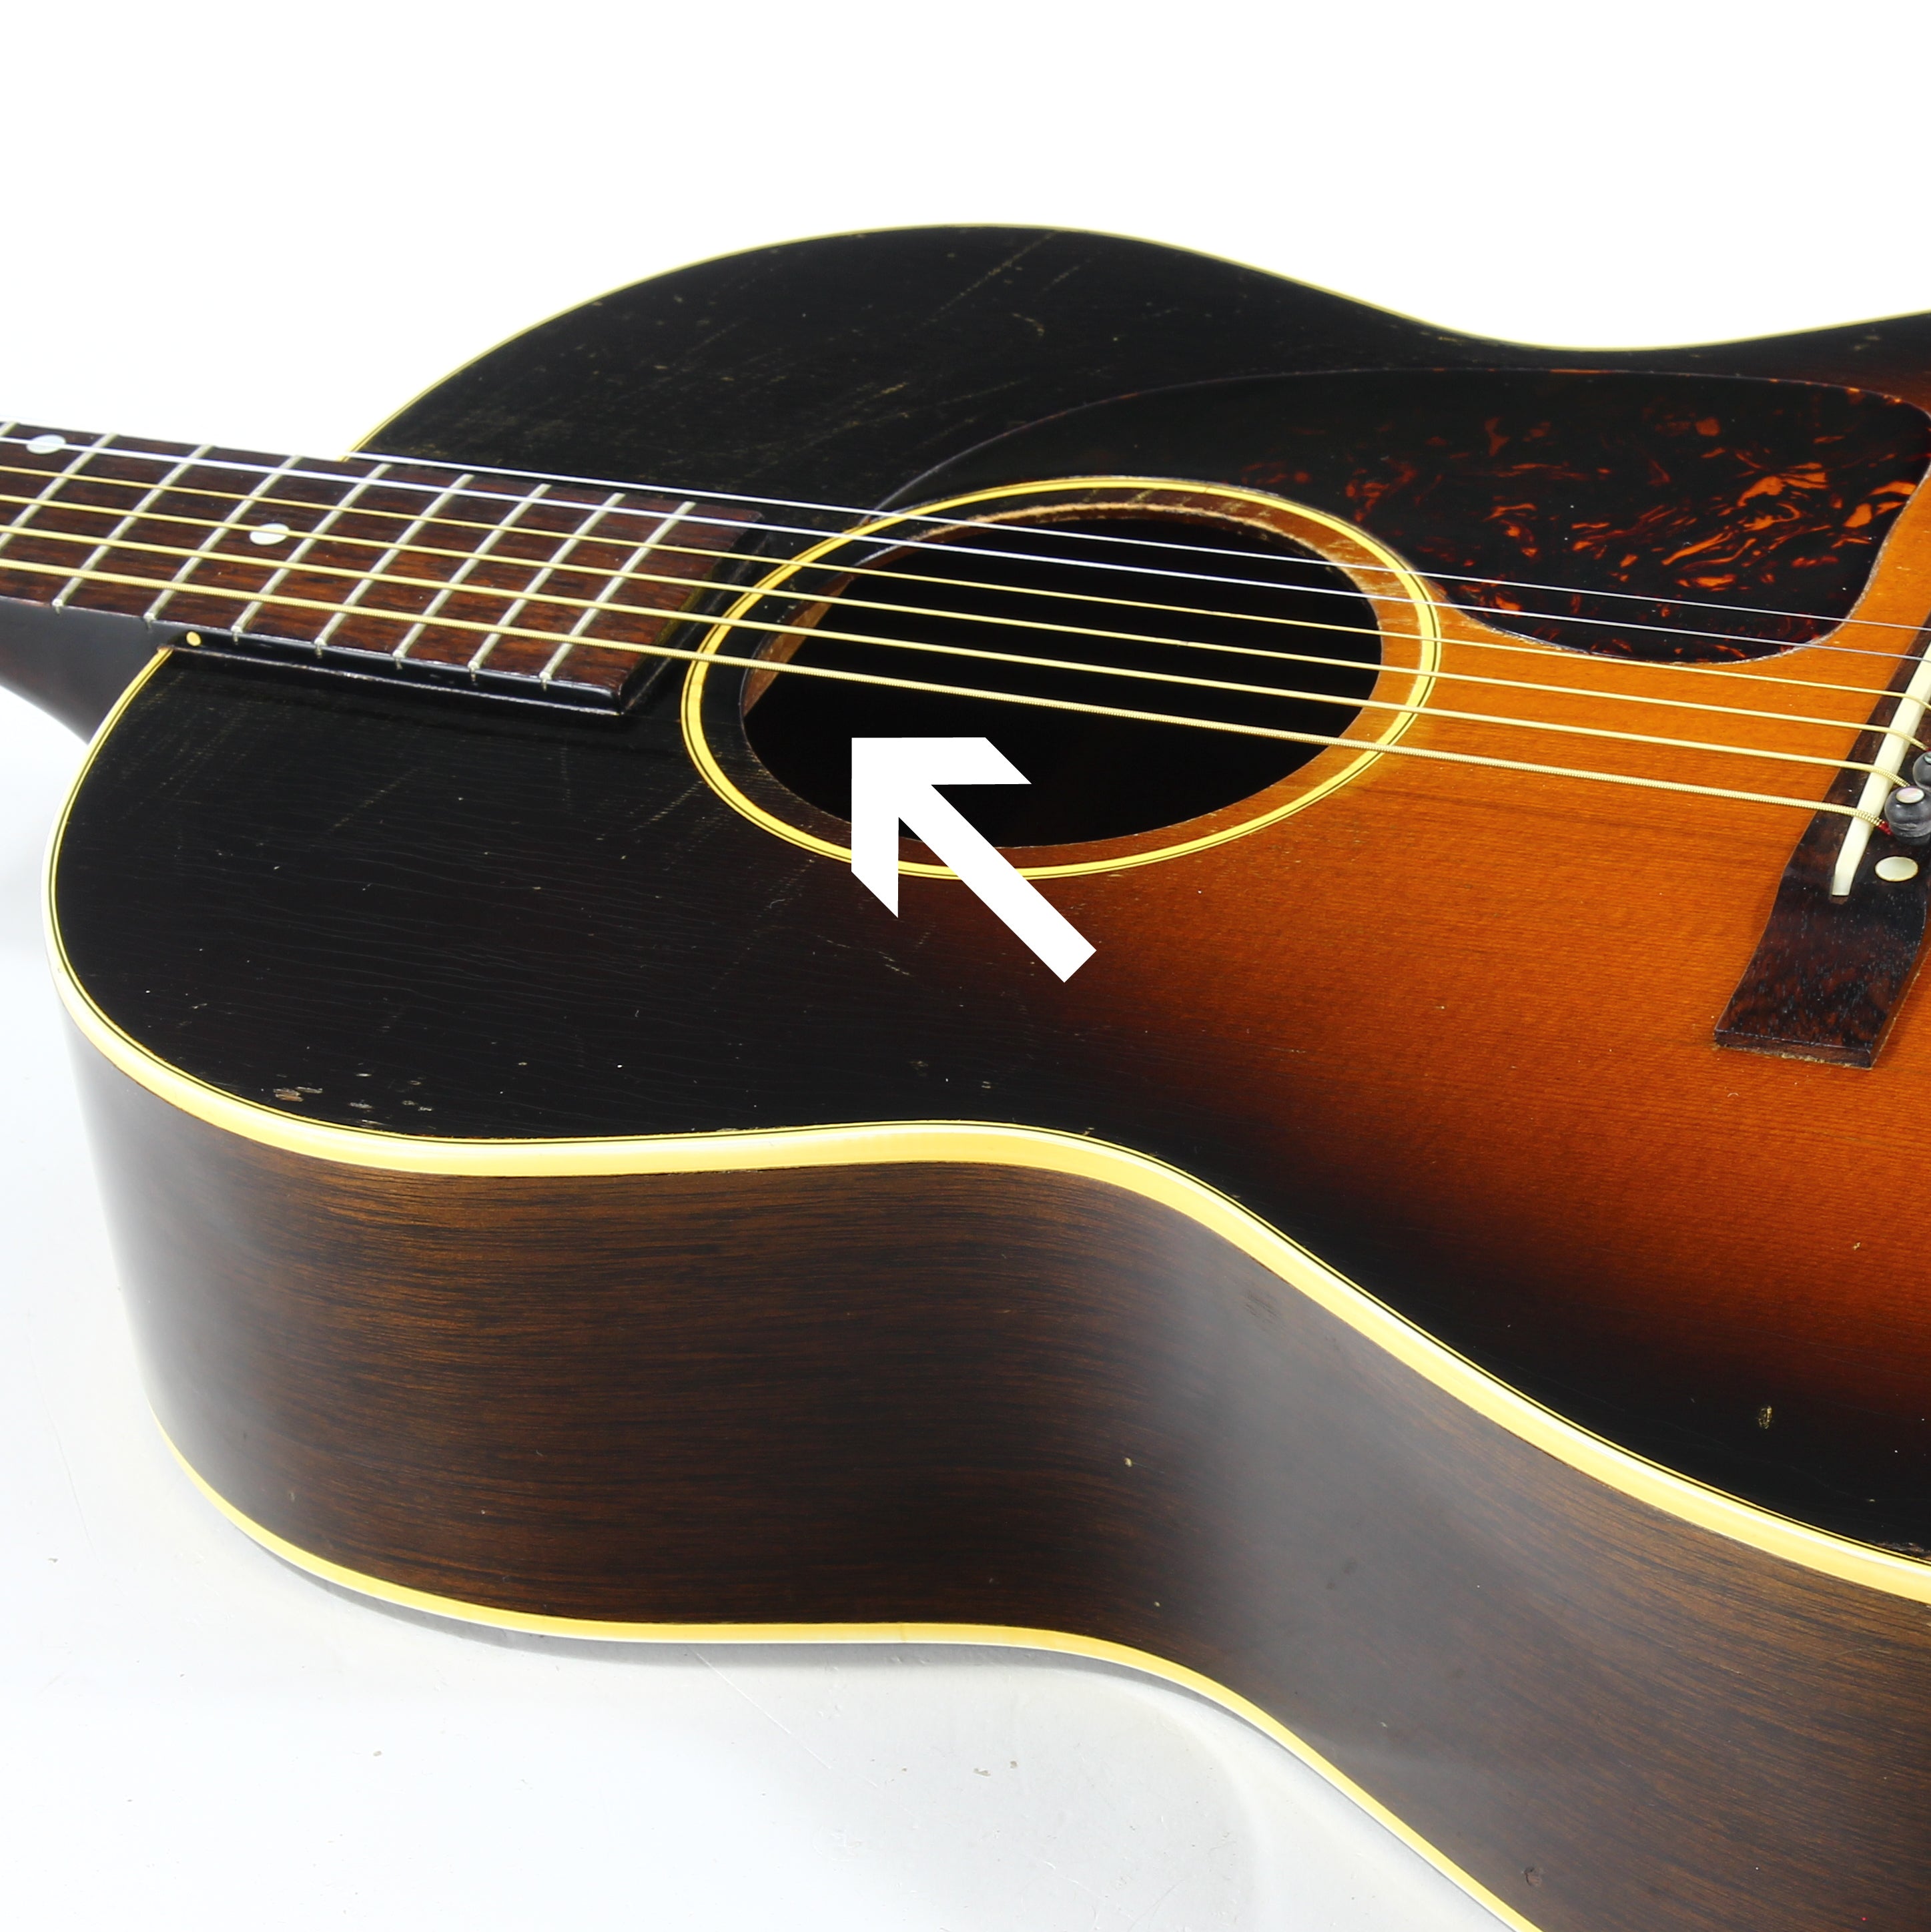 1940's Gibson LG-2 with arrow pointing to neck block